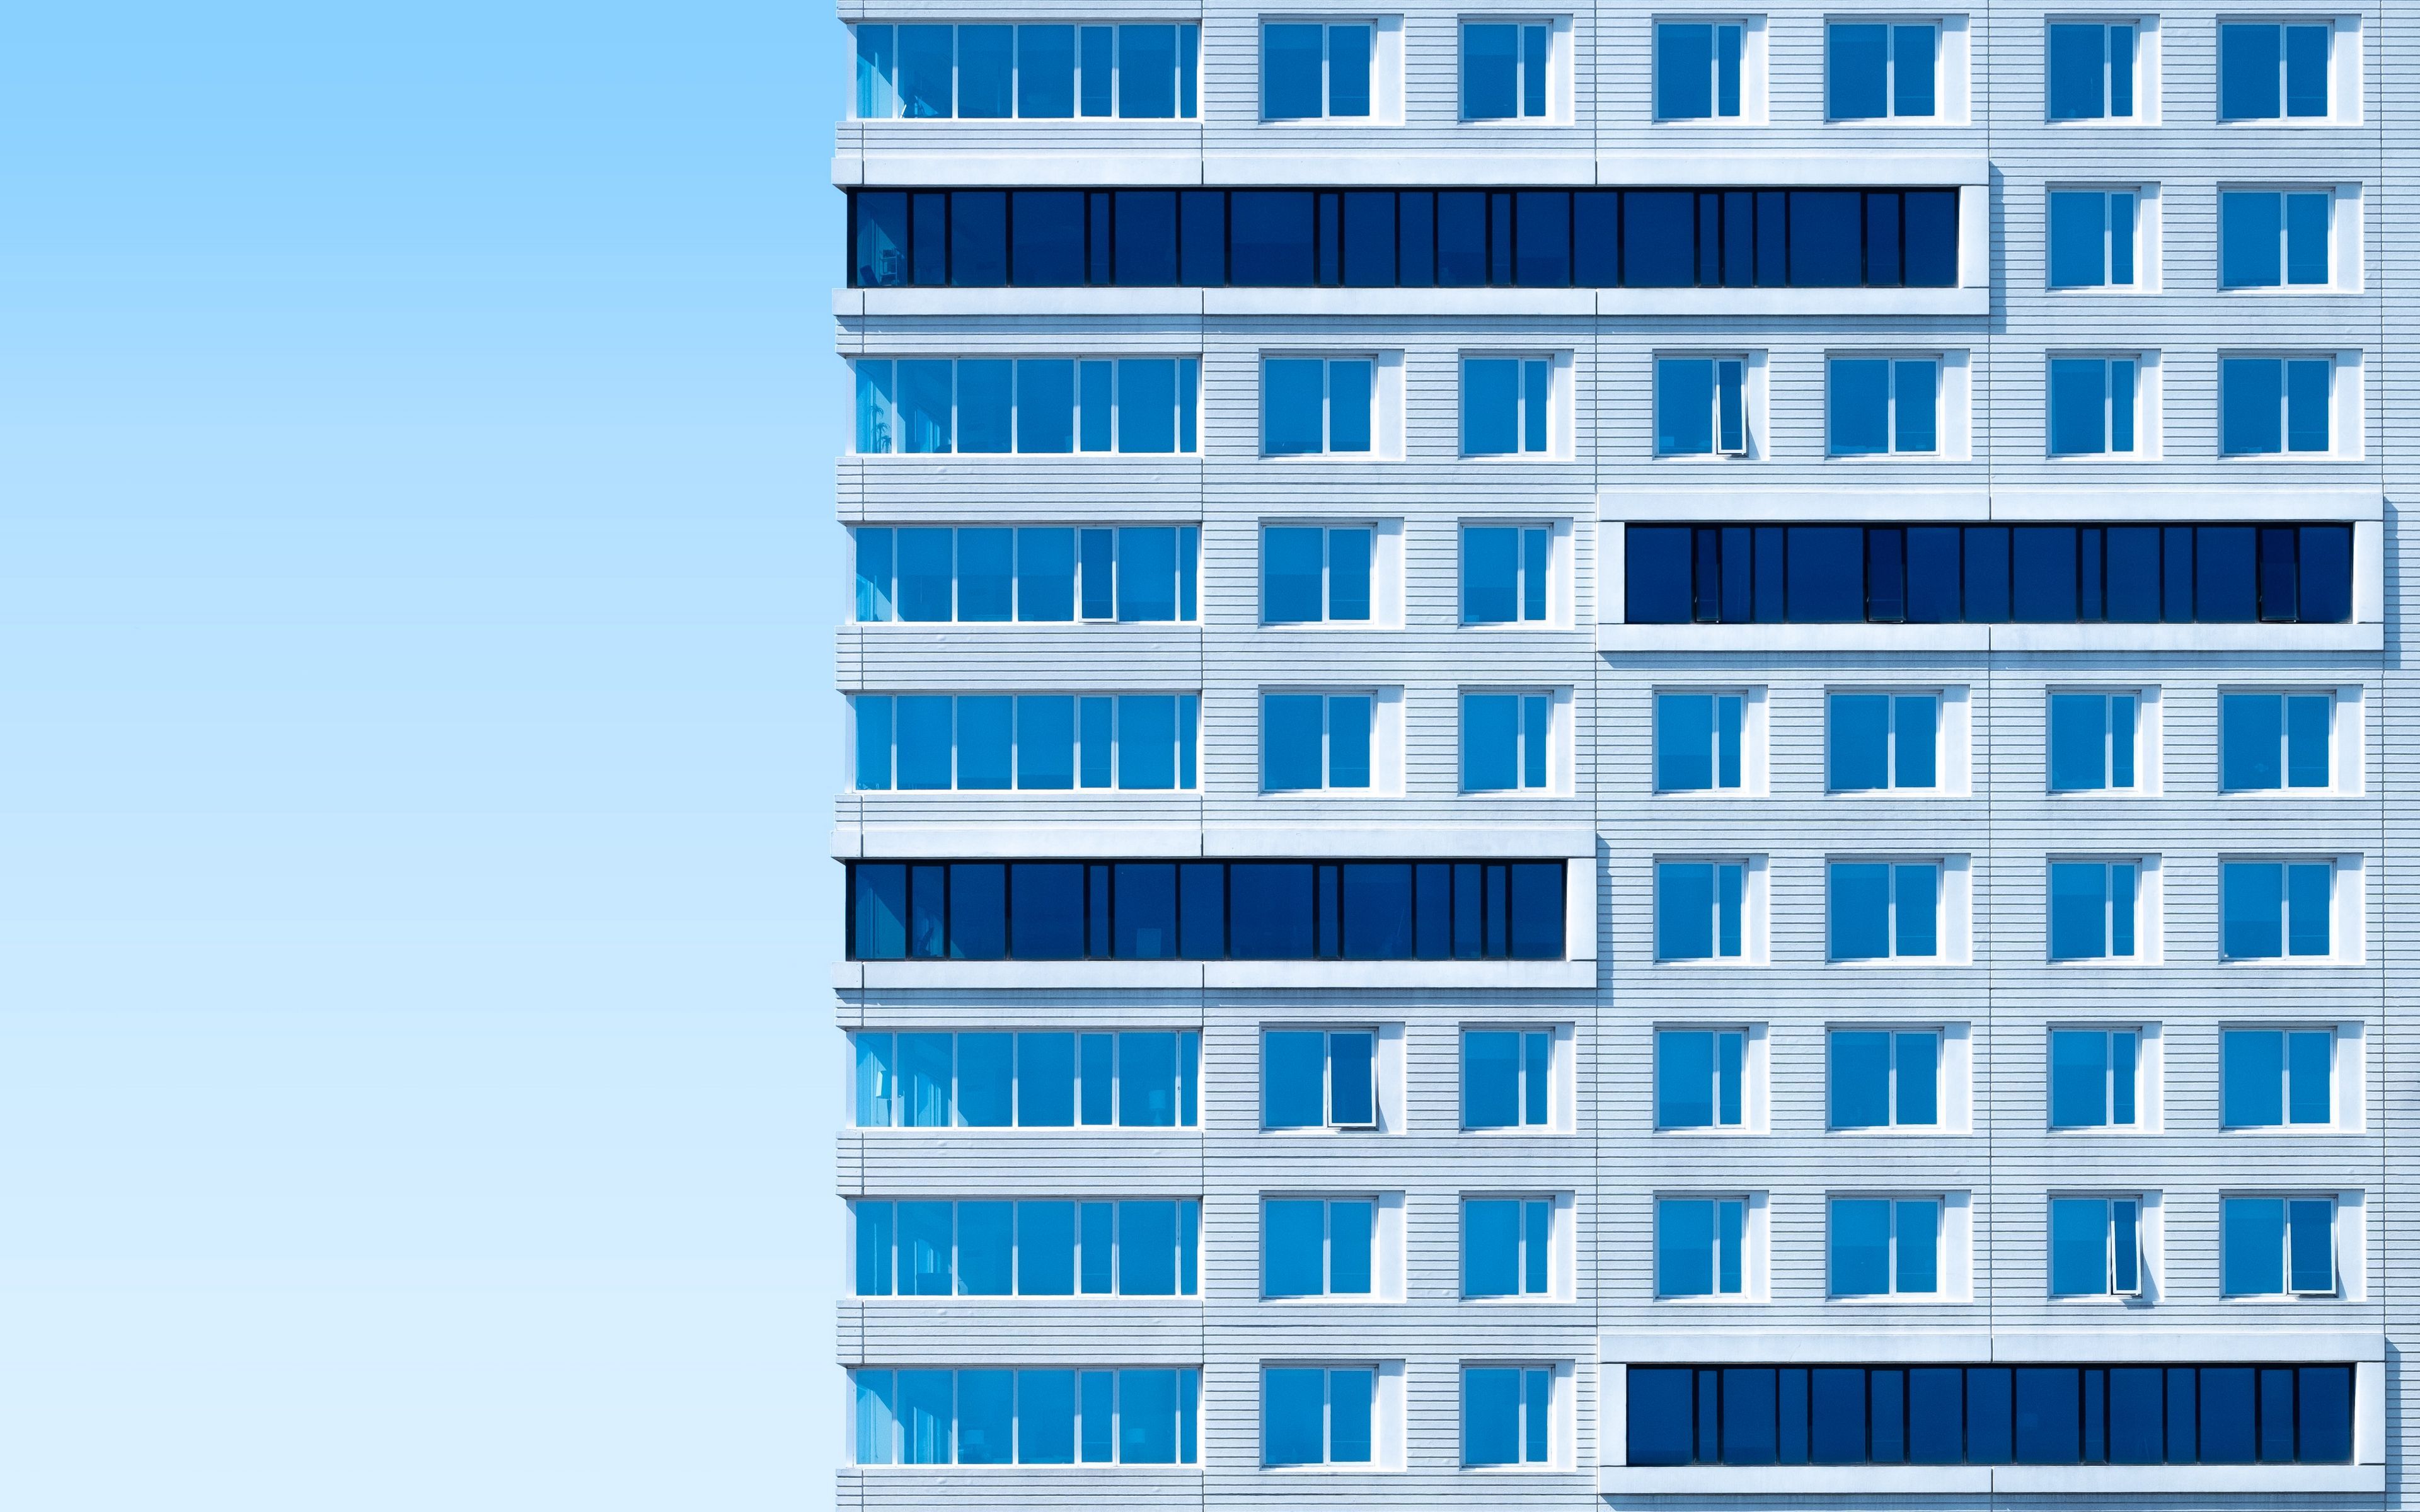 A tall building with many windows - Architecture